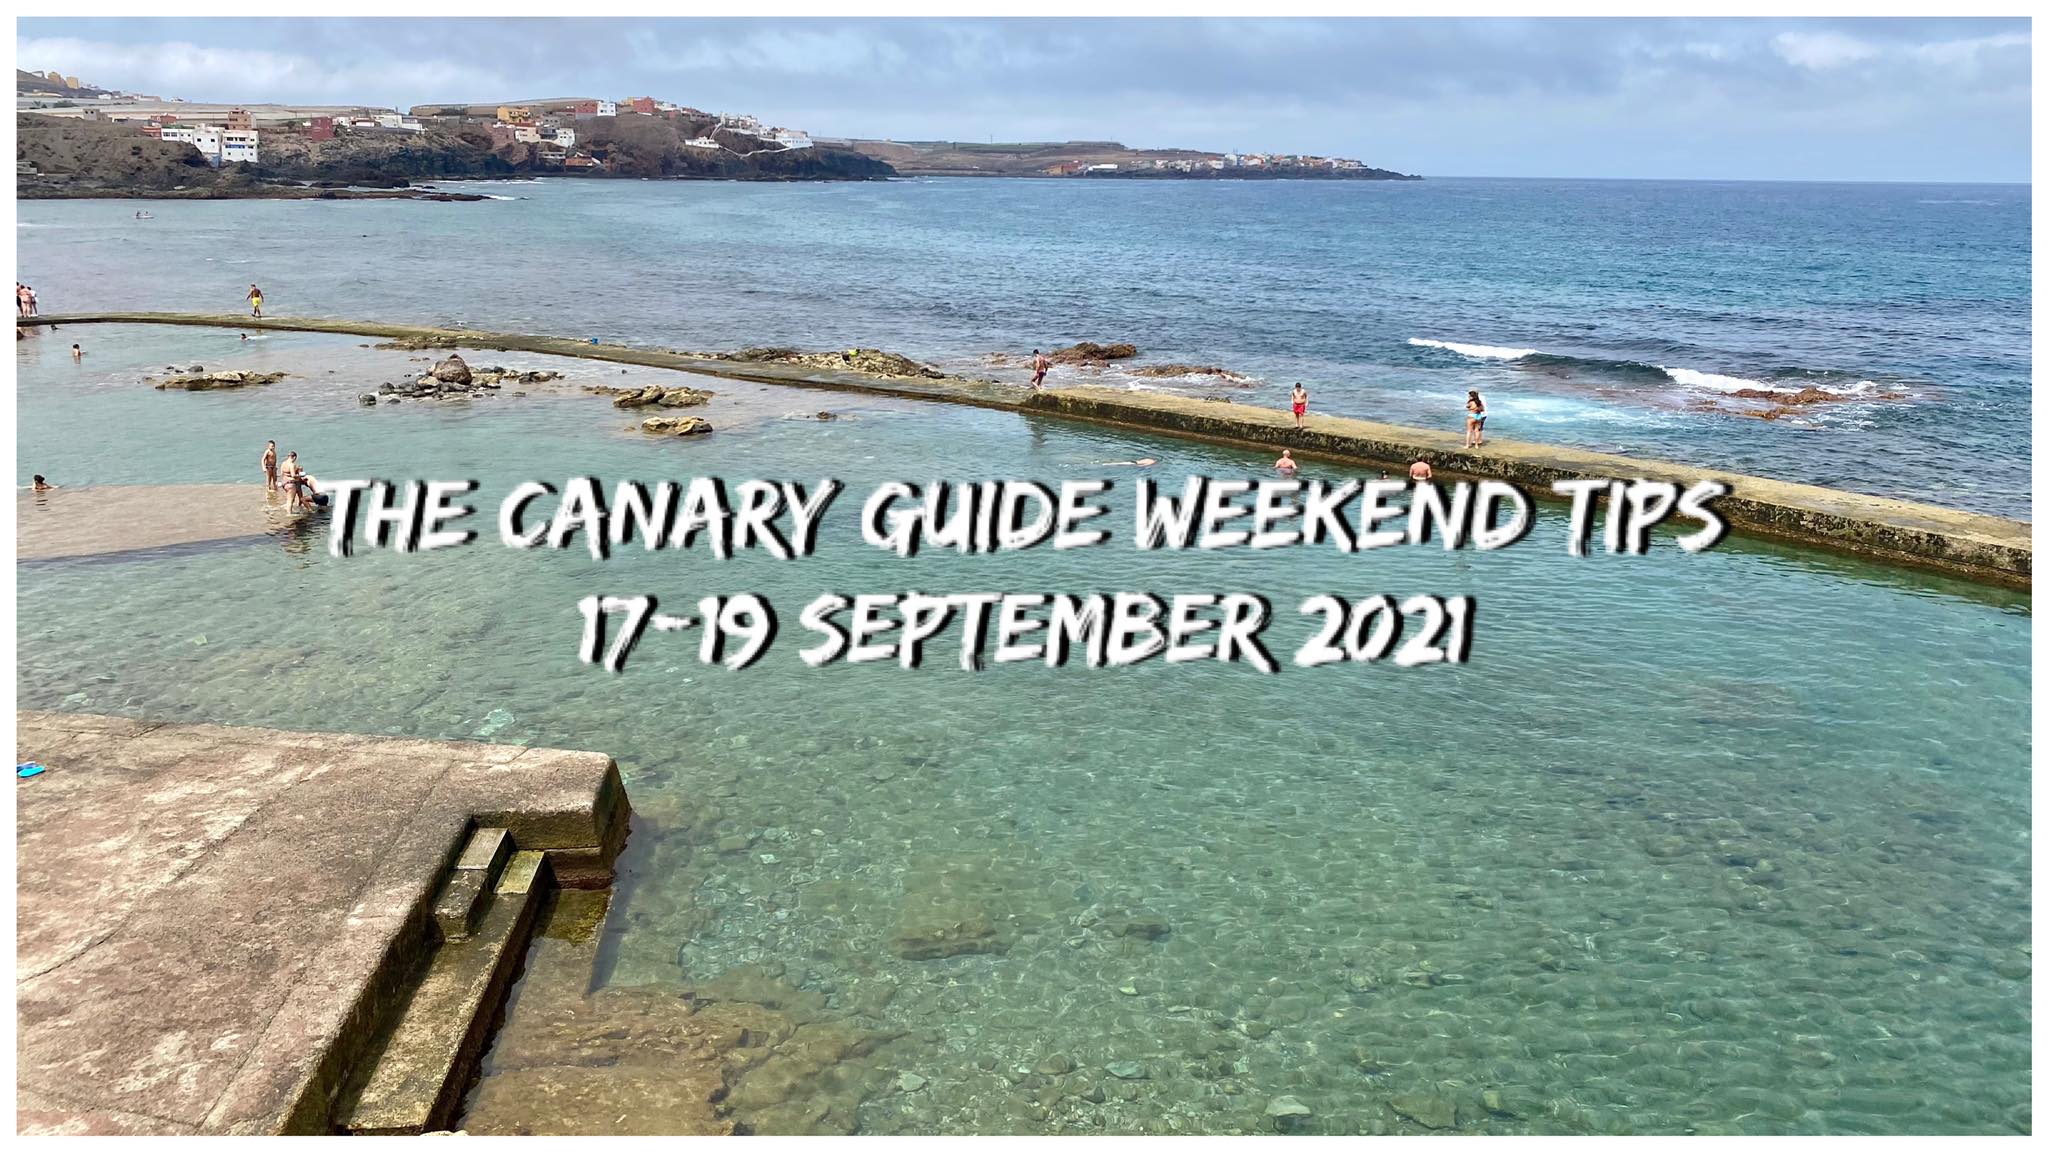 The Canary Guide Weekend Tips 17-19 September 2021